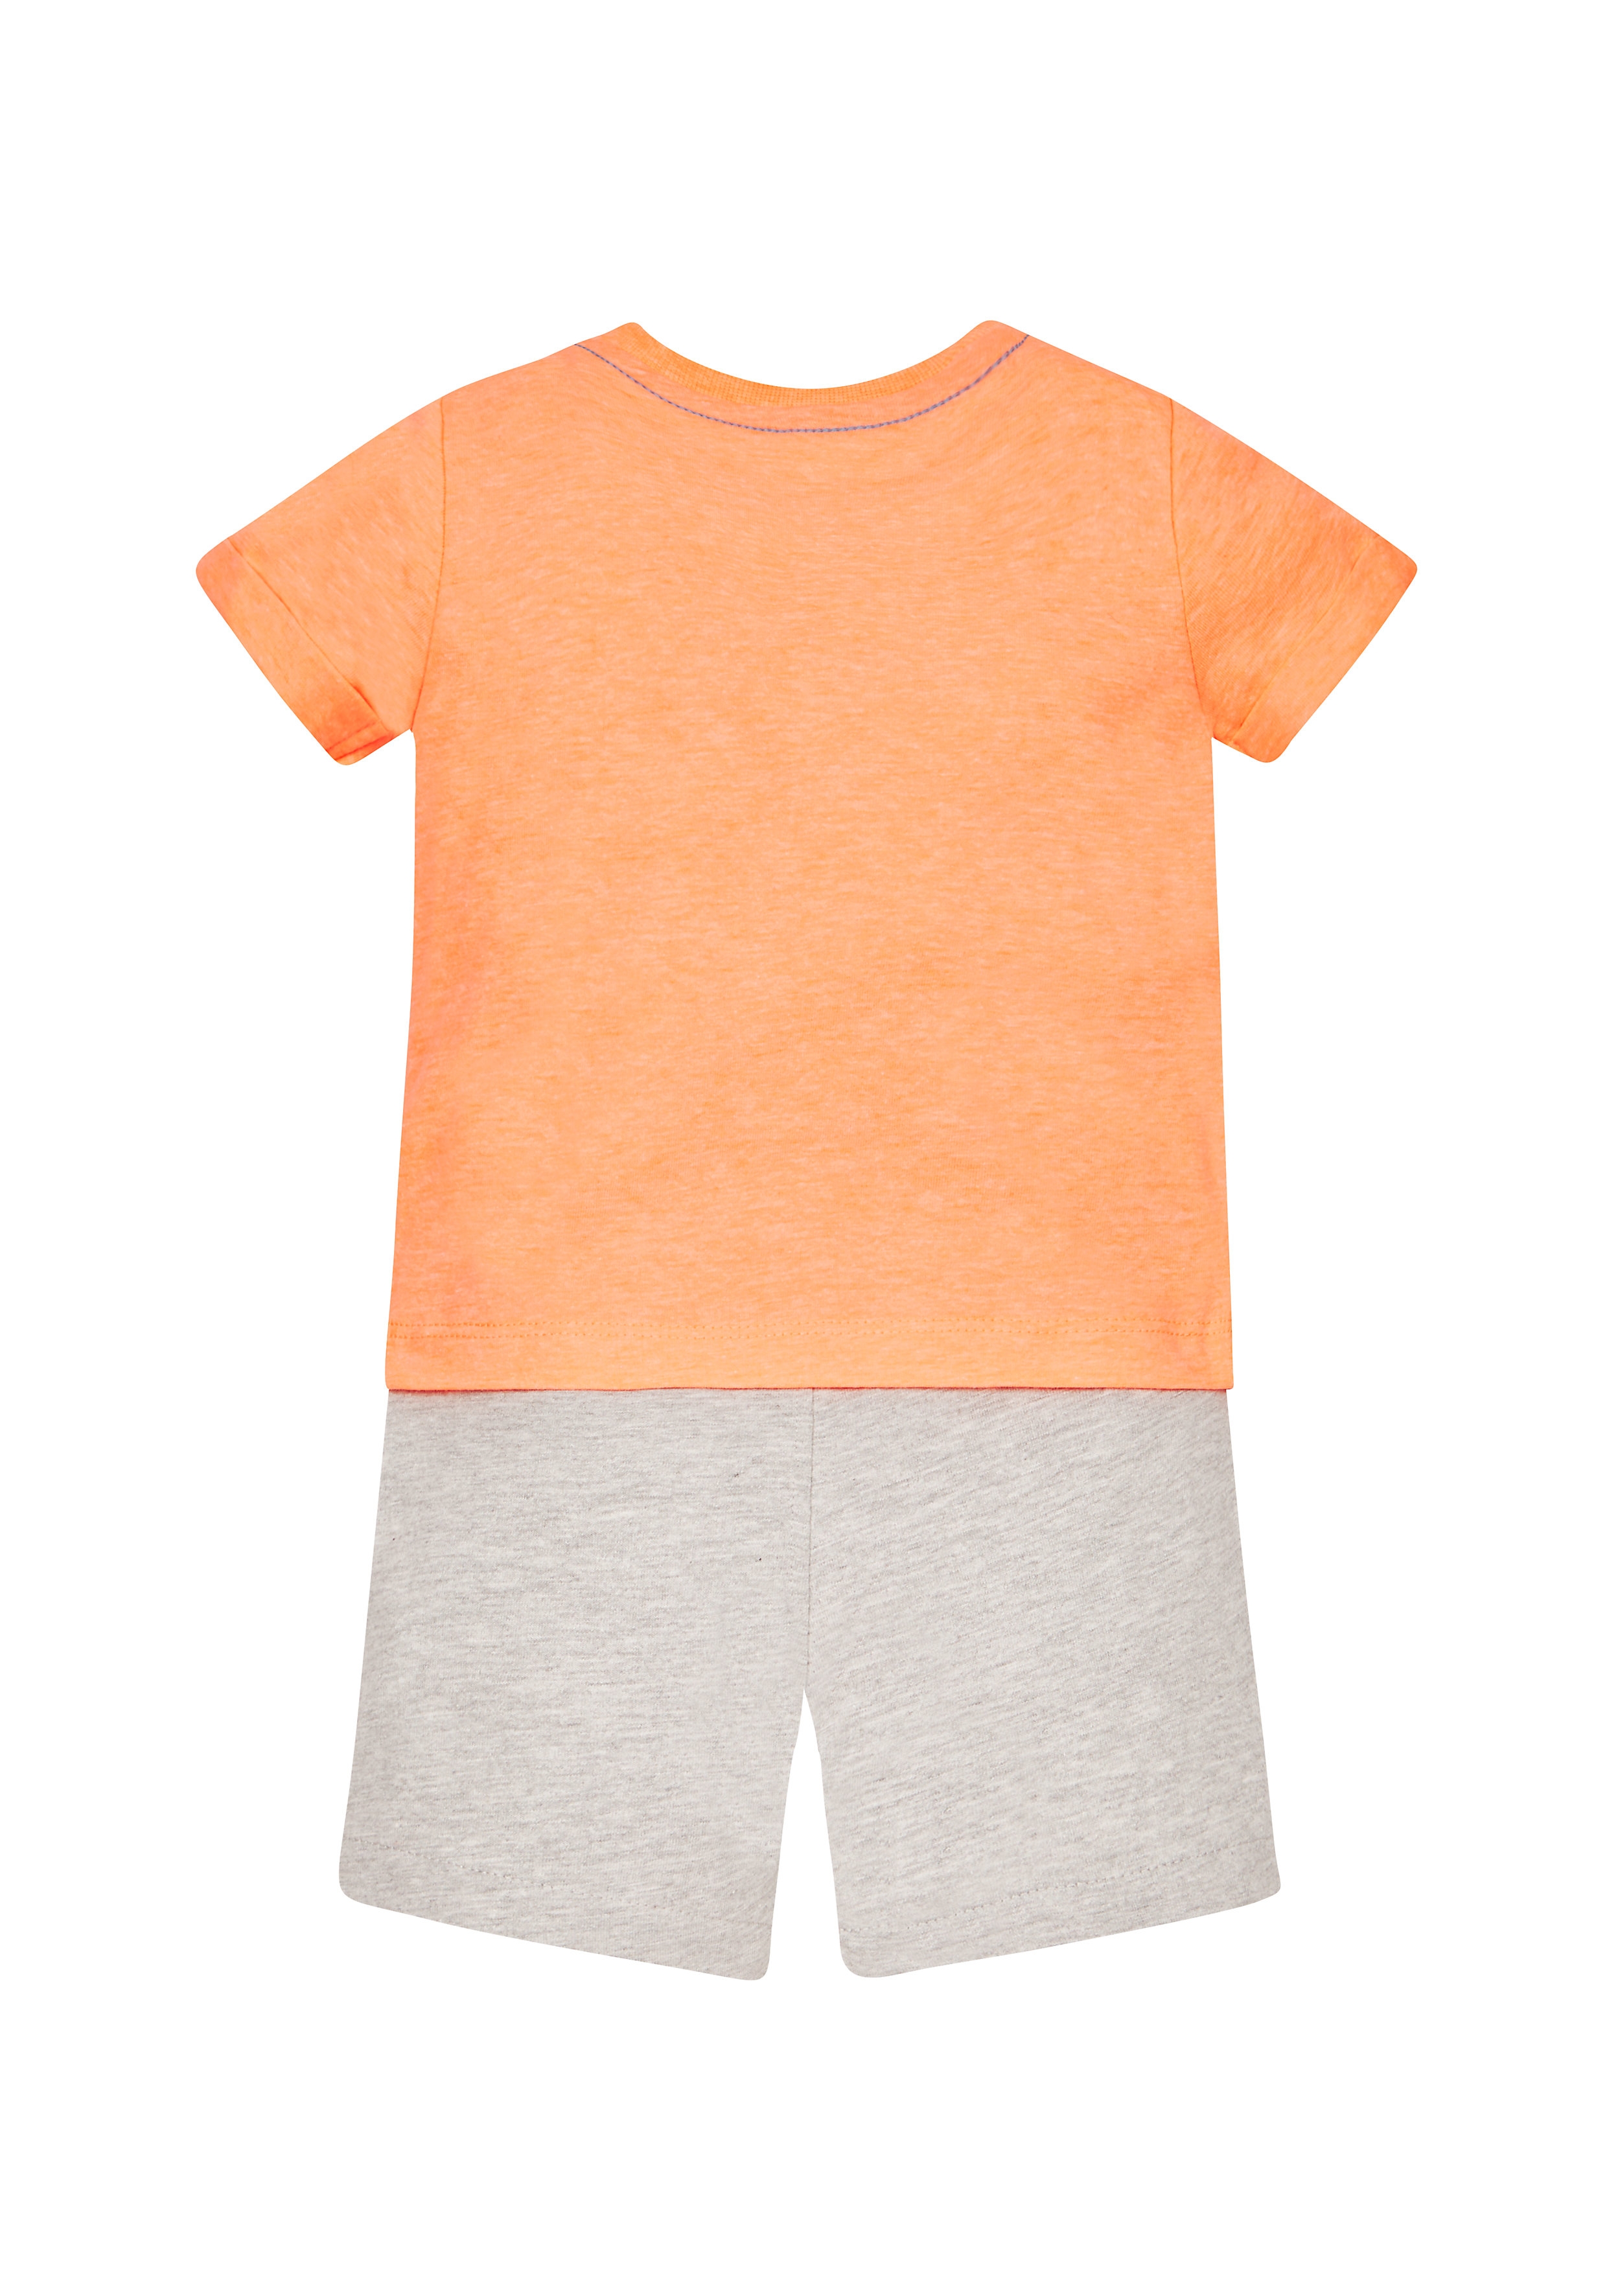 Mothercare | Boys 'Chill Out' Tee And Shorts Set - Orange 1